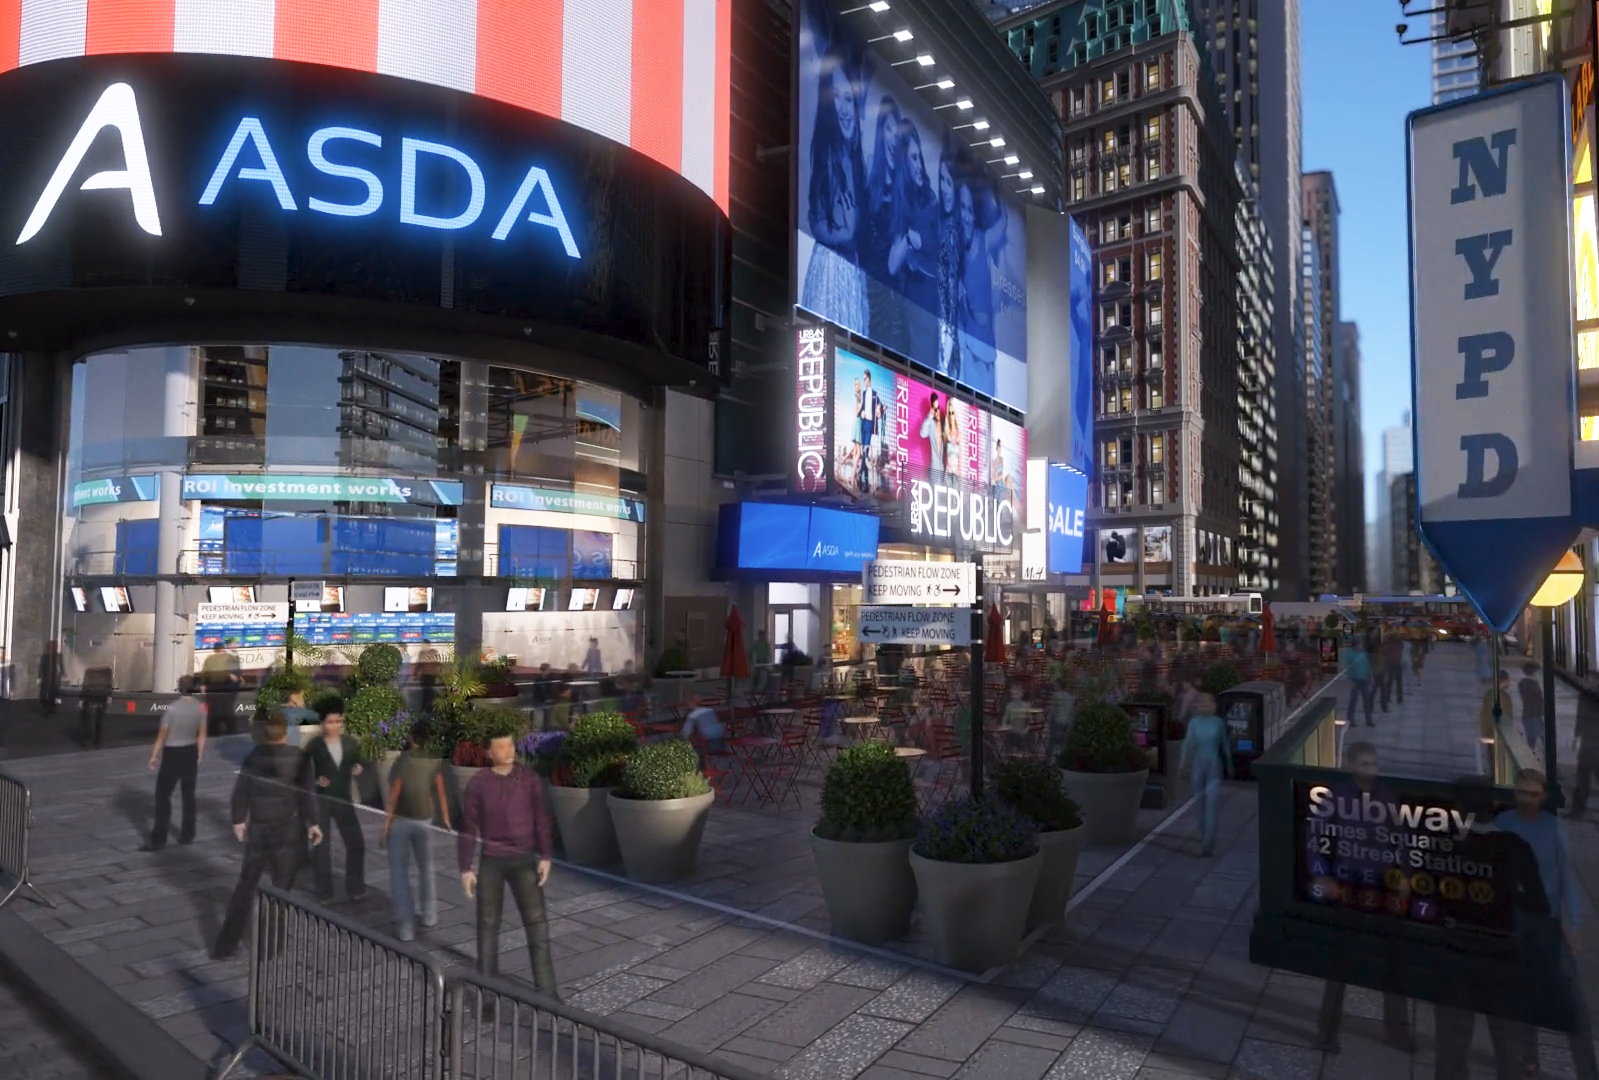 This is a 3D rendered image from Trinity's city animation is of New York's Time Square. This image displays the corner of a large building on Time Square. A blocked off area with red tables and chairs is located between the buildings where 3D modeled people are displayed eating and roaming the sidewalks.